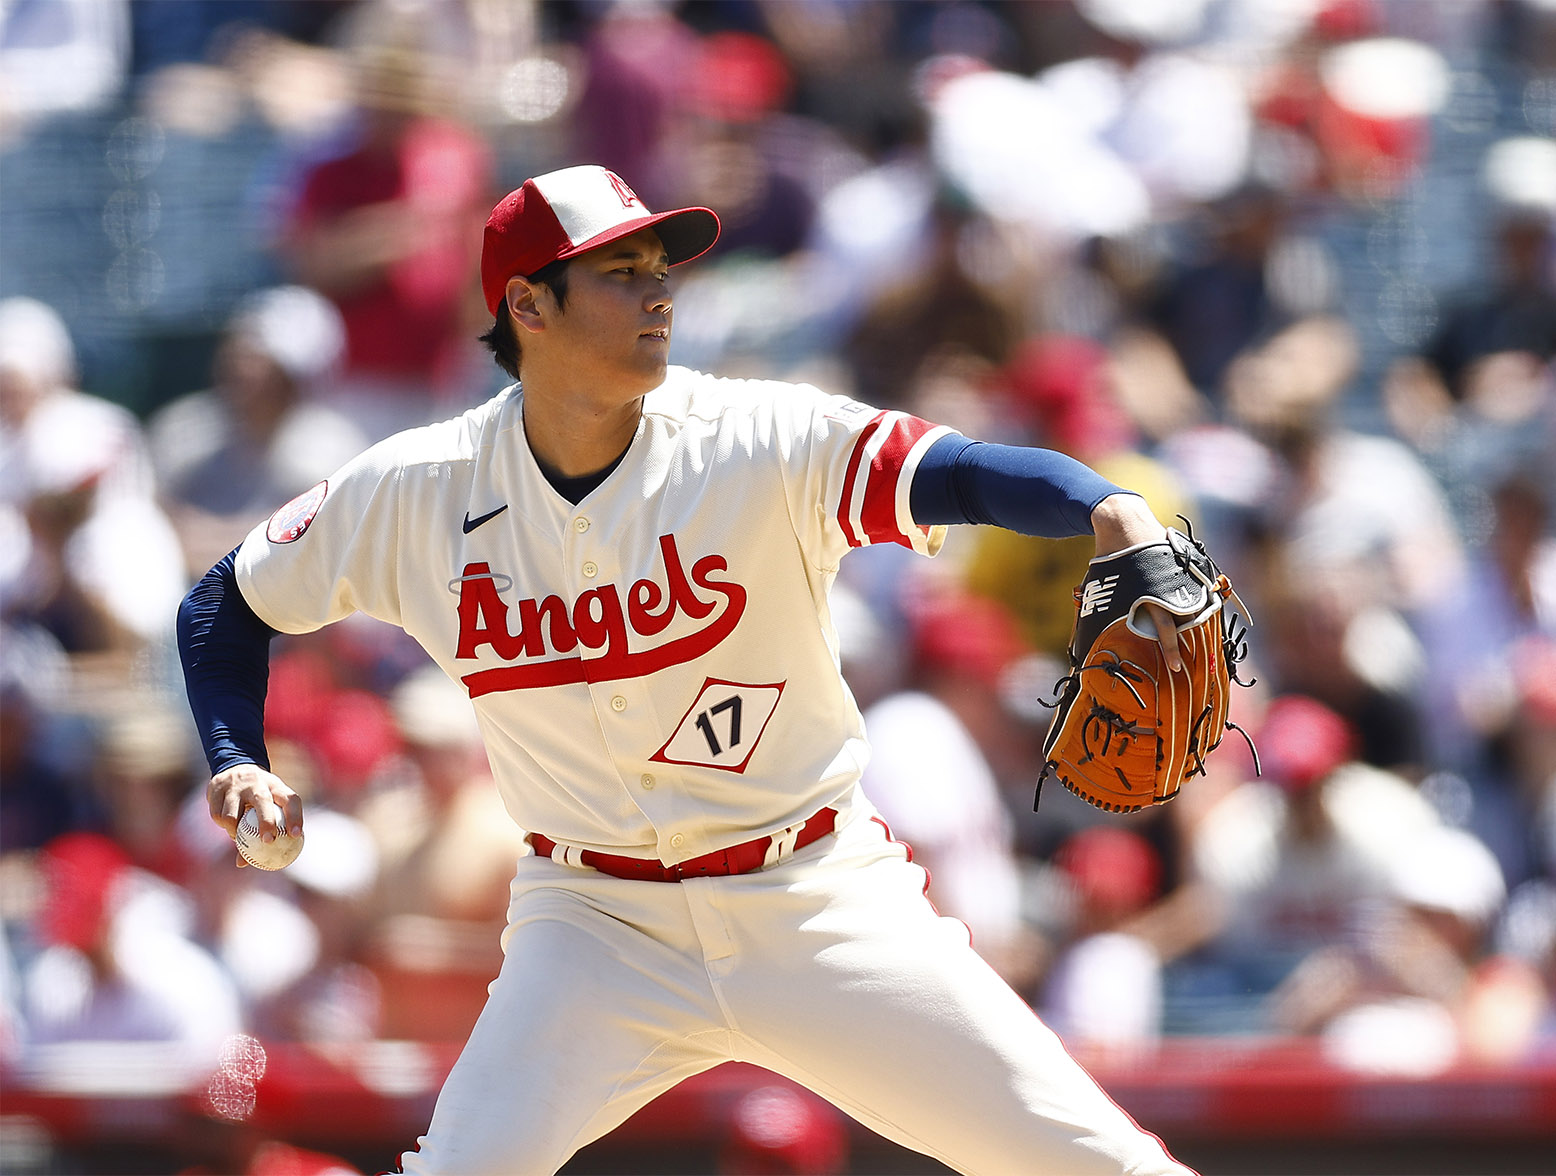 ANAHEIM, CALIFORNIA - AUGUST 23: Shohei Ohtani #17 of the Los Angeles Angels throws against the Cincinnati Reds in the second inning during game one of a doubleheader at Angel Stadium of Anaheim on August 23, 2023 in Anaheim, California. (Photo by Ronald Martinez/Getty Images)